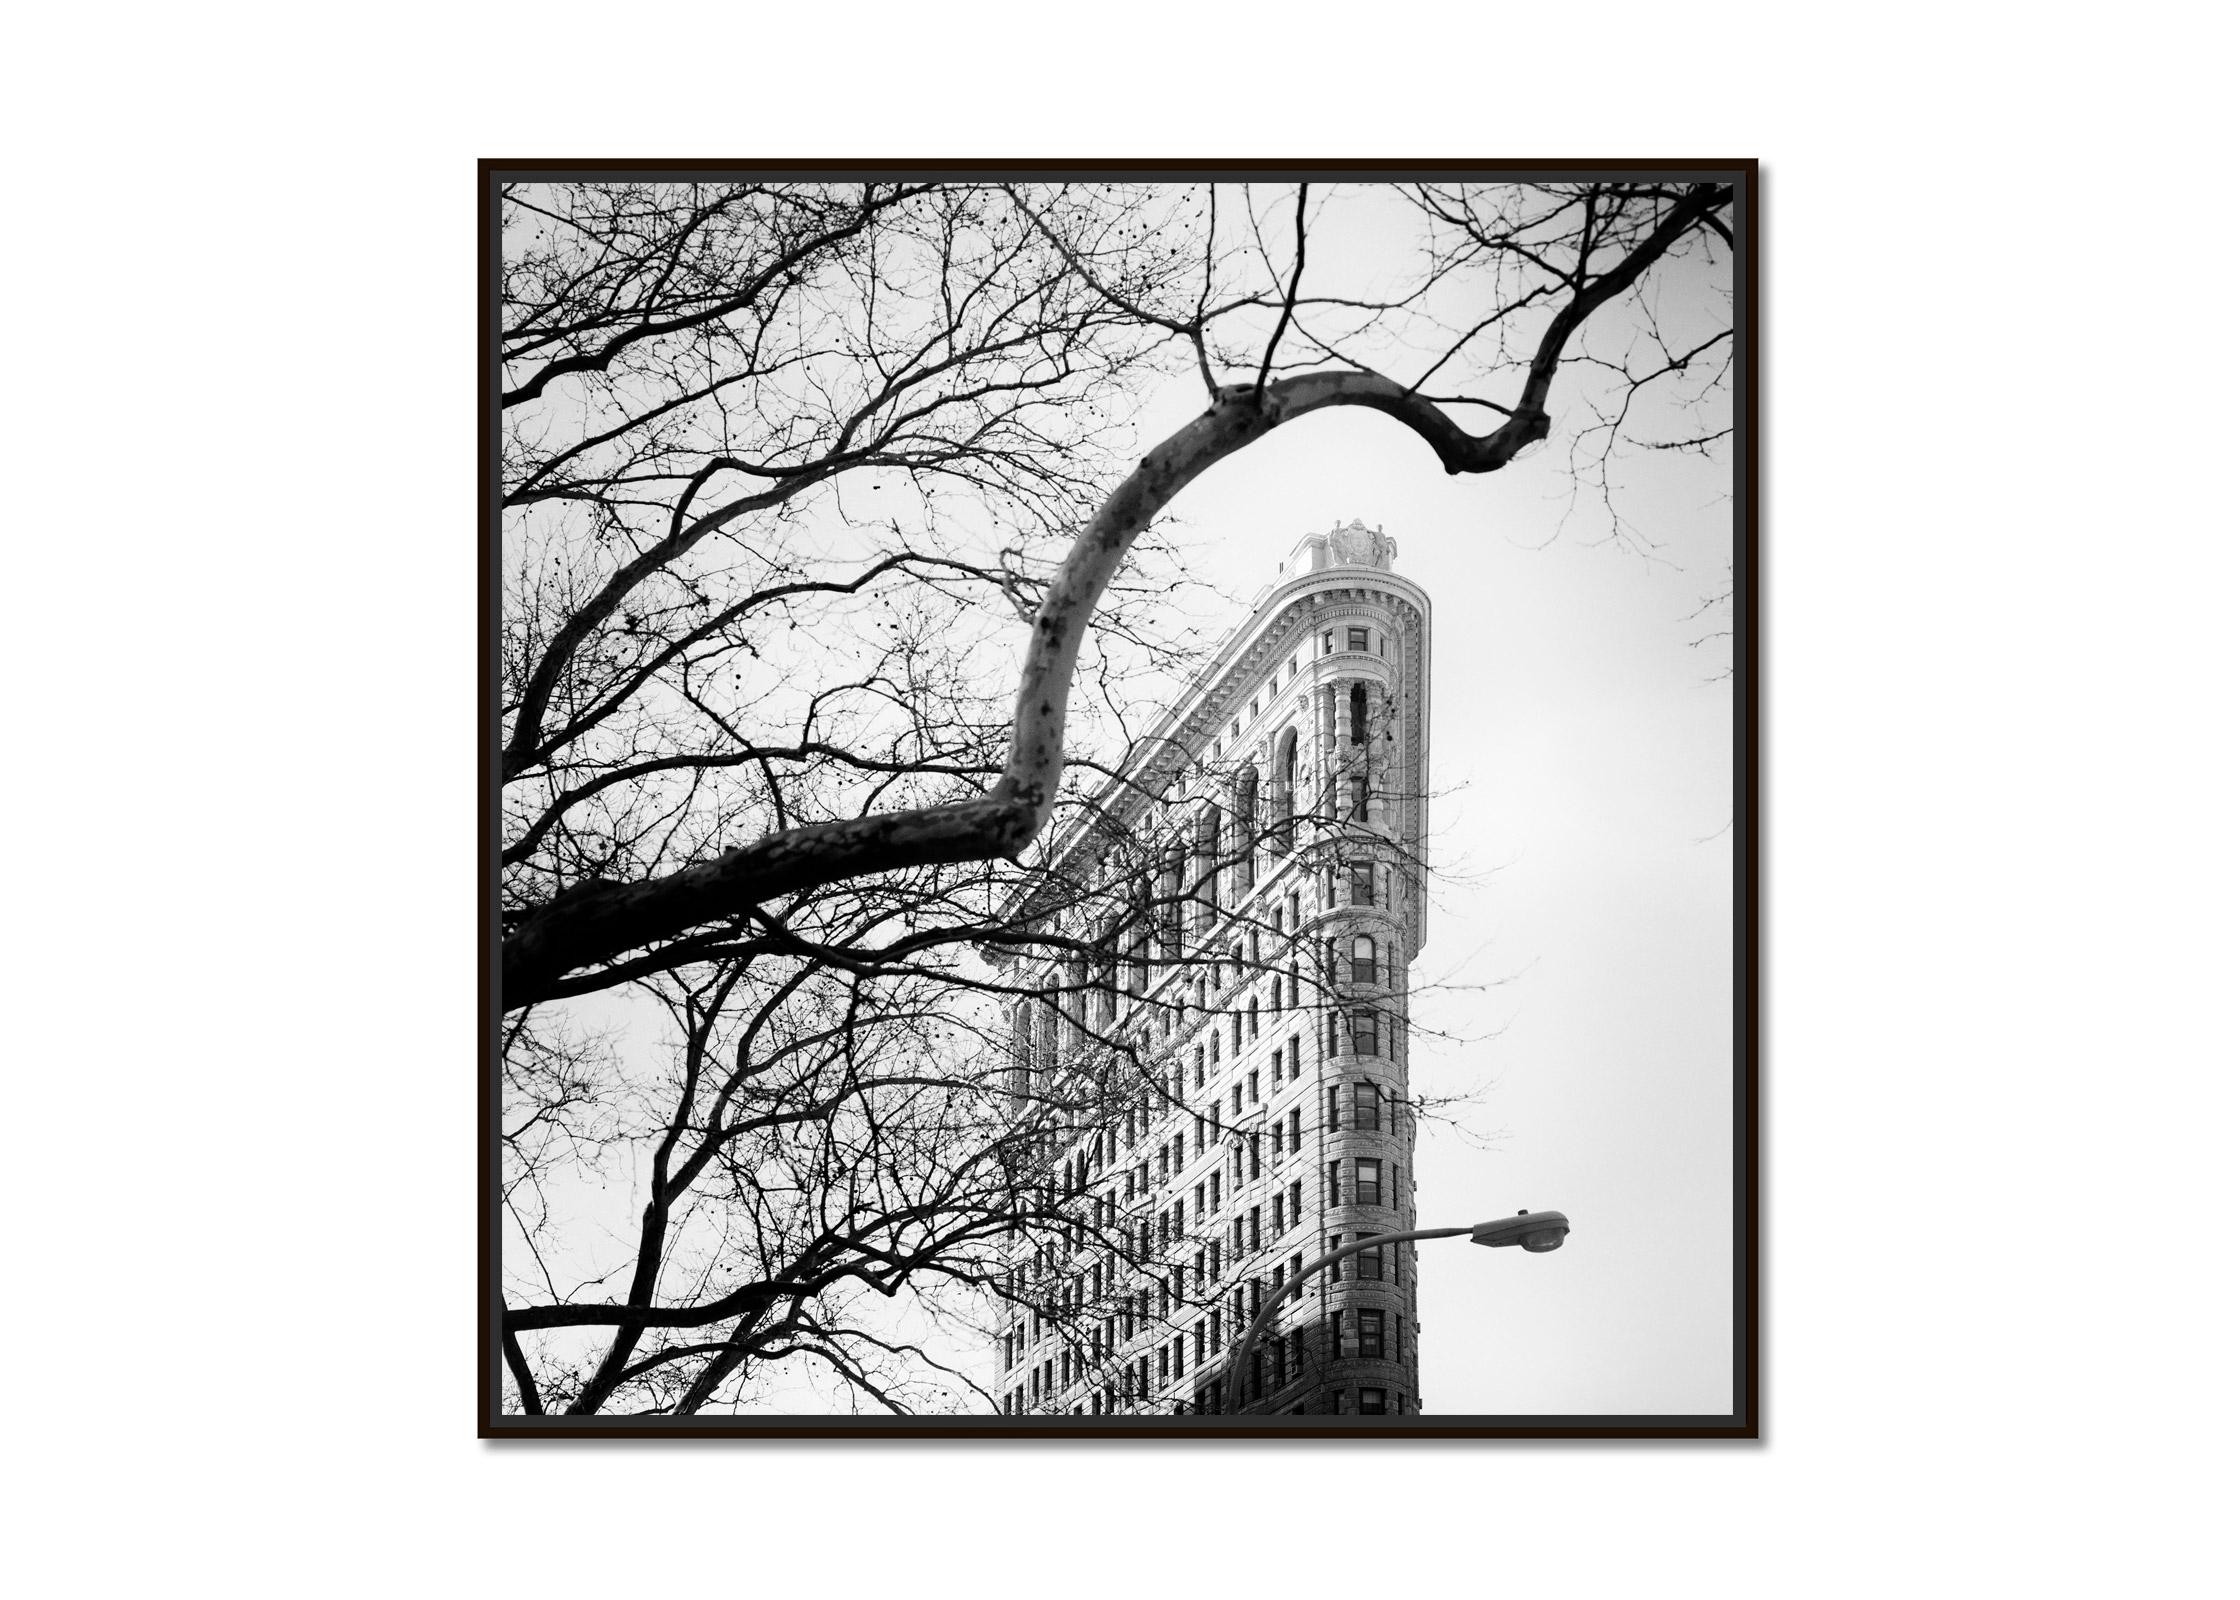 Flatiron Building, New York City, USA, black and white photography, cityscape - Photograph by Gerald Berghammer